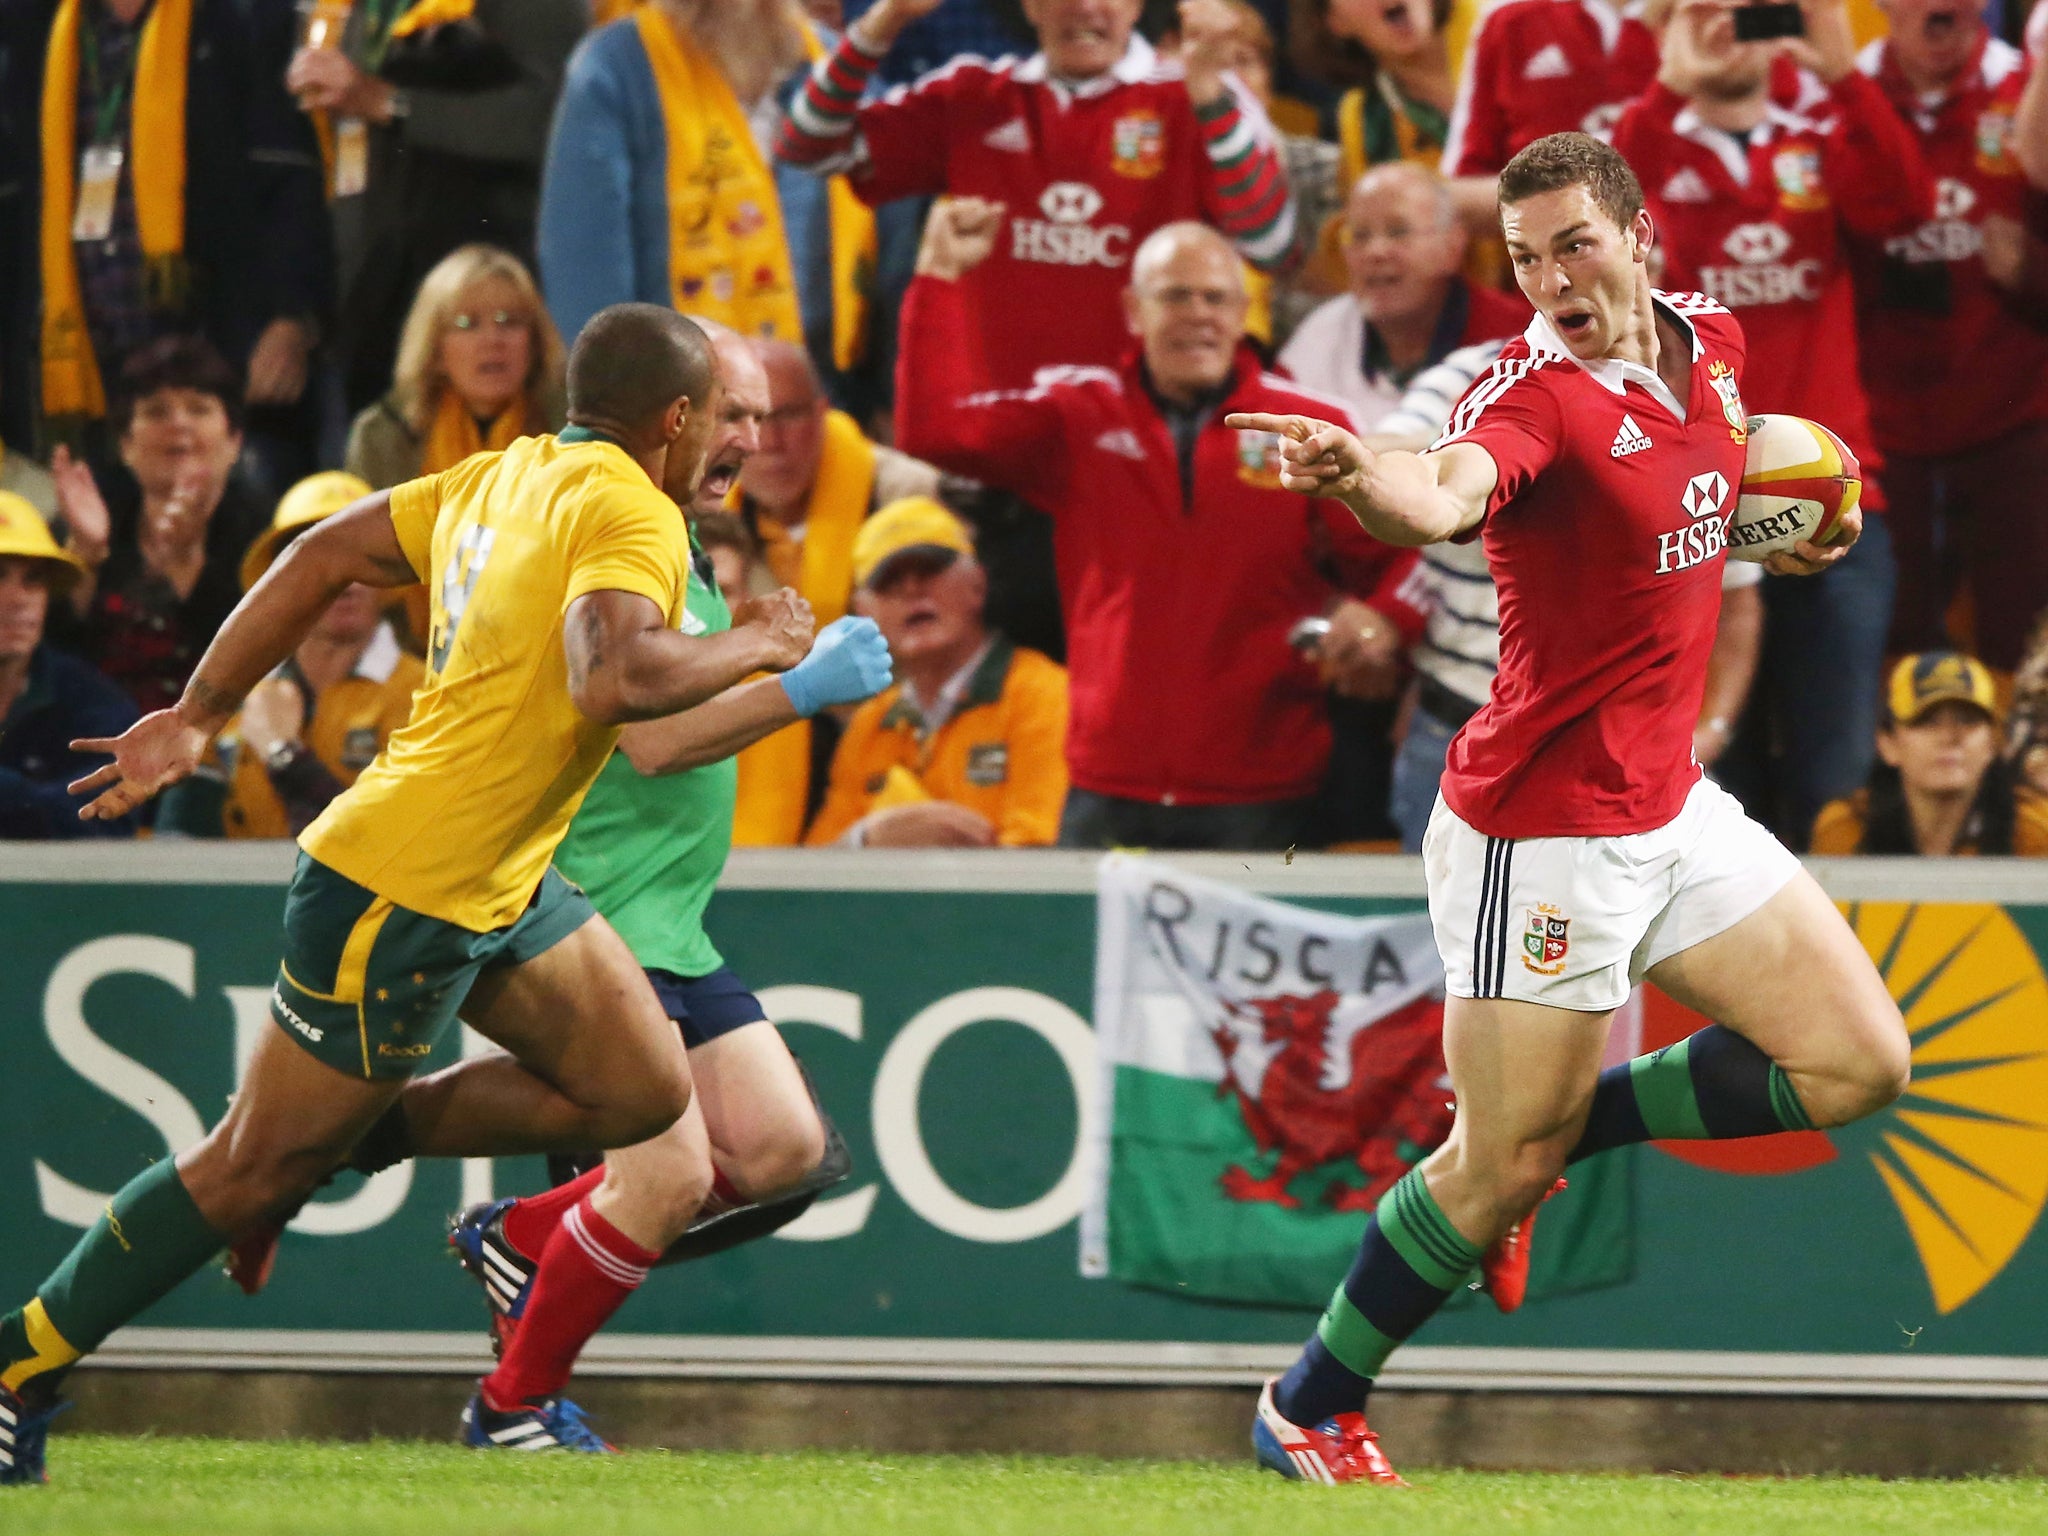 George North of the Lions taunts Will Genia as he breaks clear to score the first Lions try during the First Test match between the Australian Wallabies and the British & Irish Lions